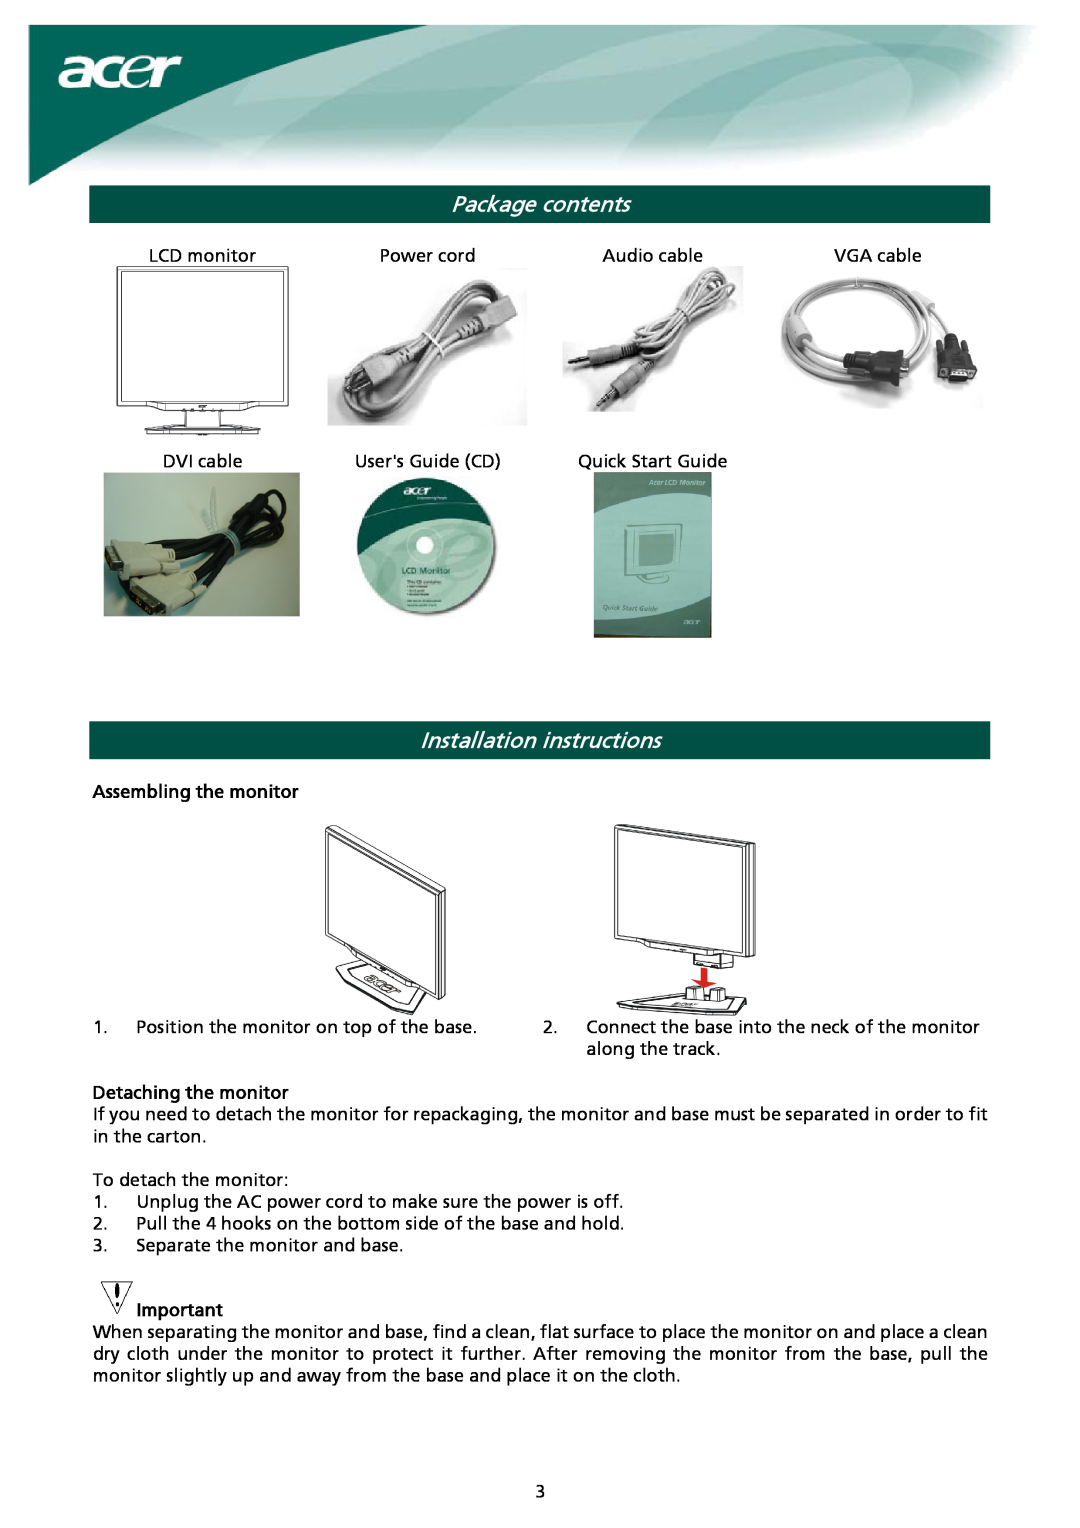 Acer AL2023 Package contents, Installation instructions, Assembling the monitor, Detaching the monitor 